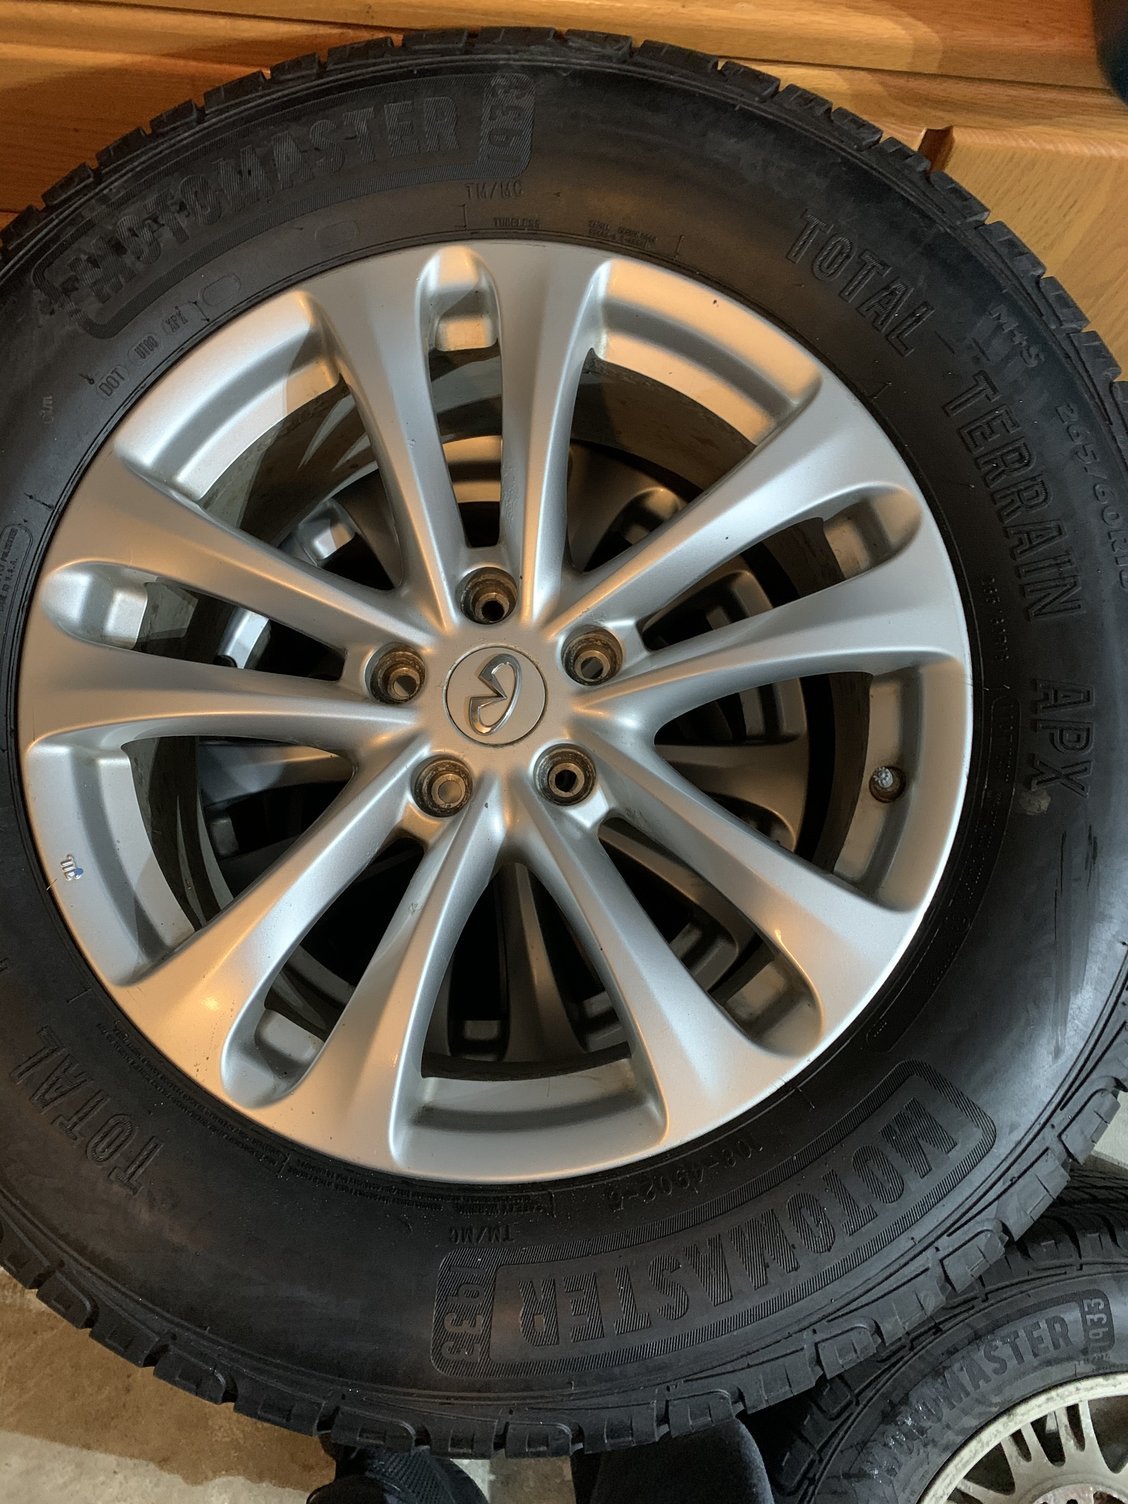 Did I buy wheels that dont fit my car?